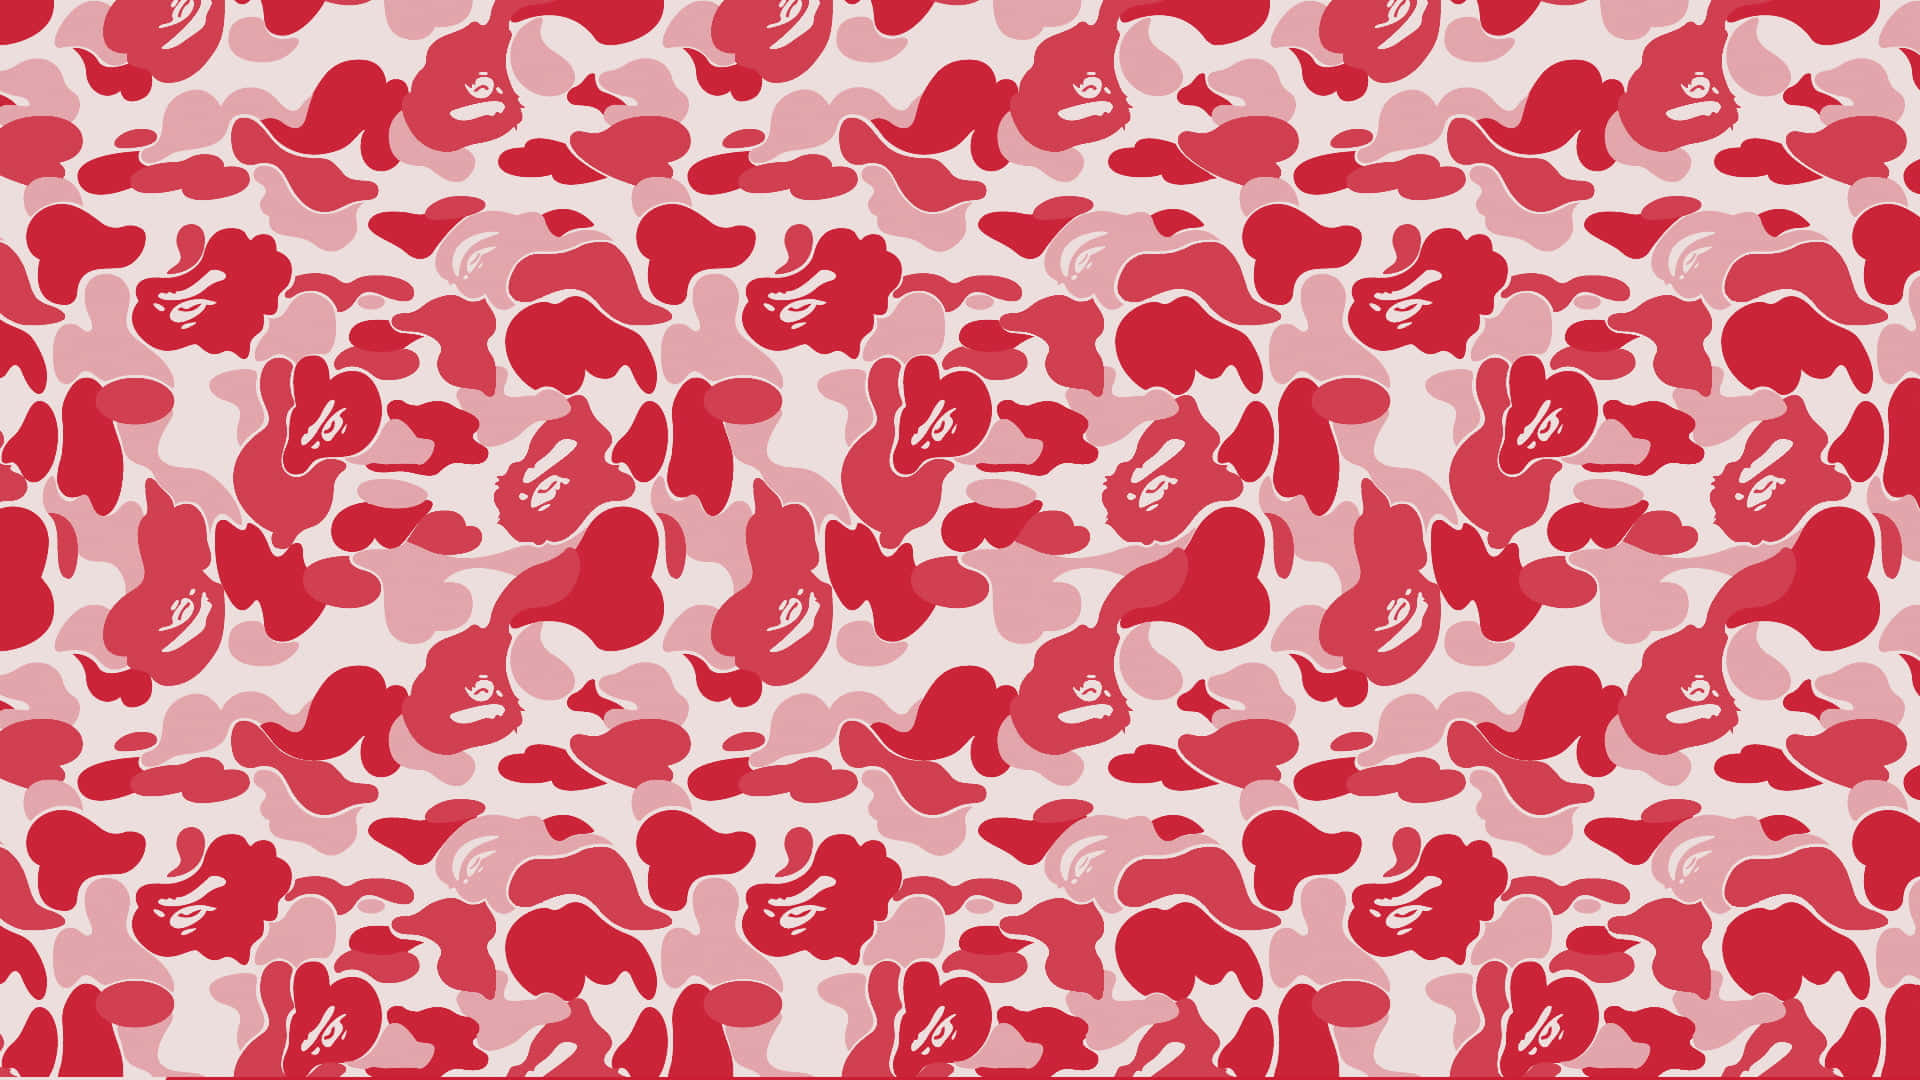 Stand Out in Red Bape Clothing Wallpaper